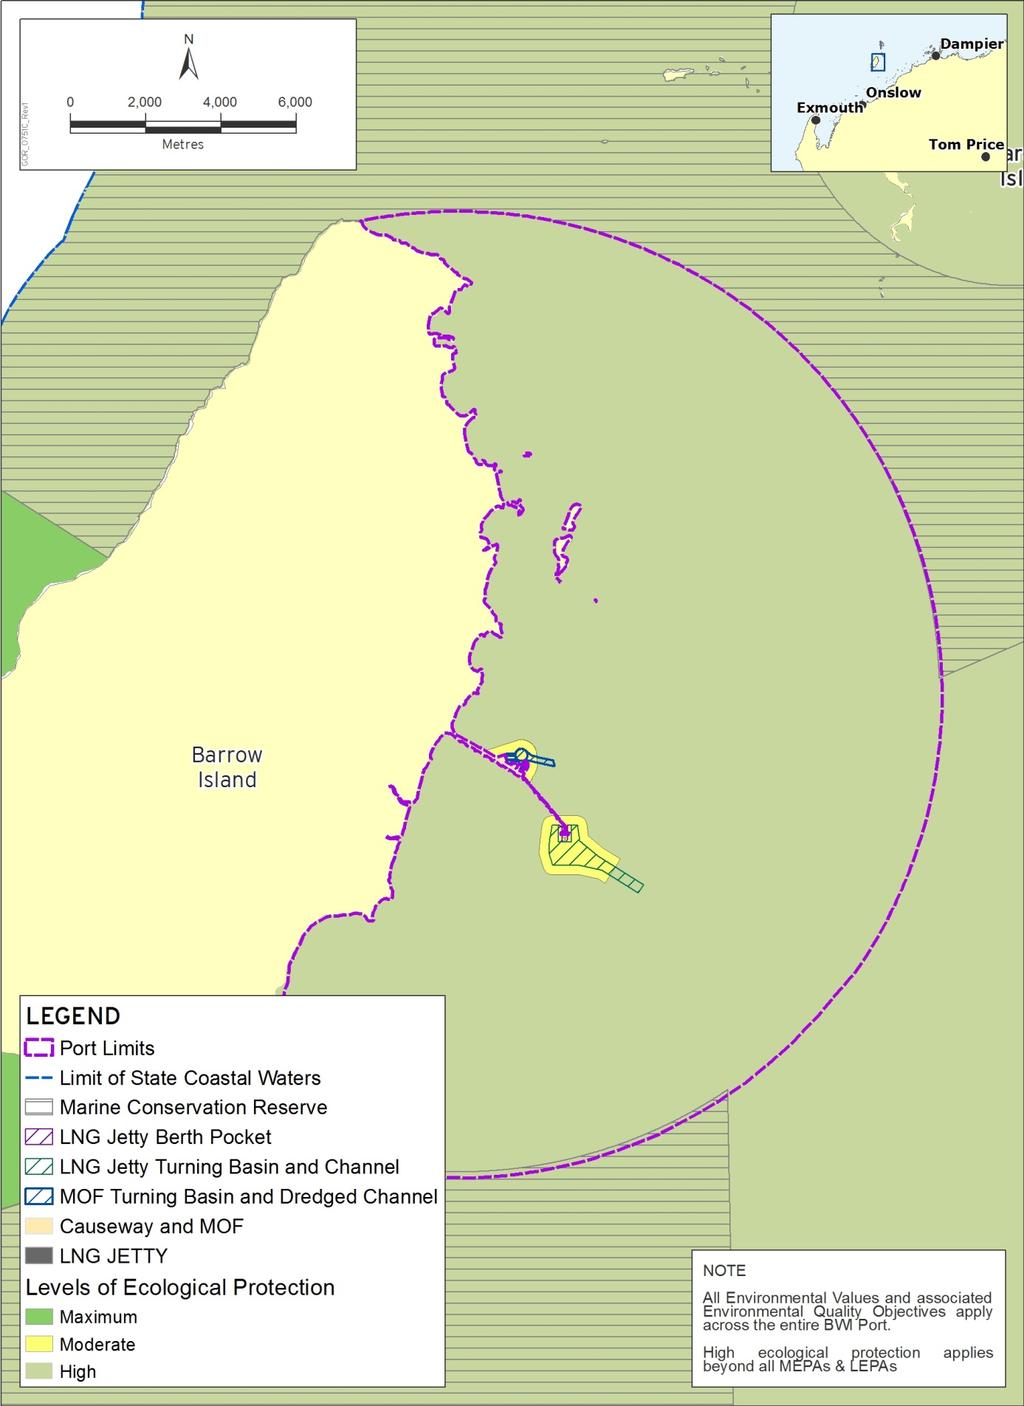 Figure 6-2: Areas of Ecological Protection within the Barrow Island Port Area